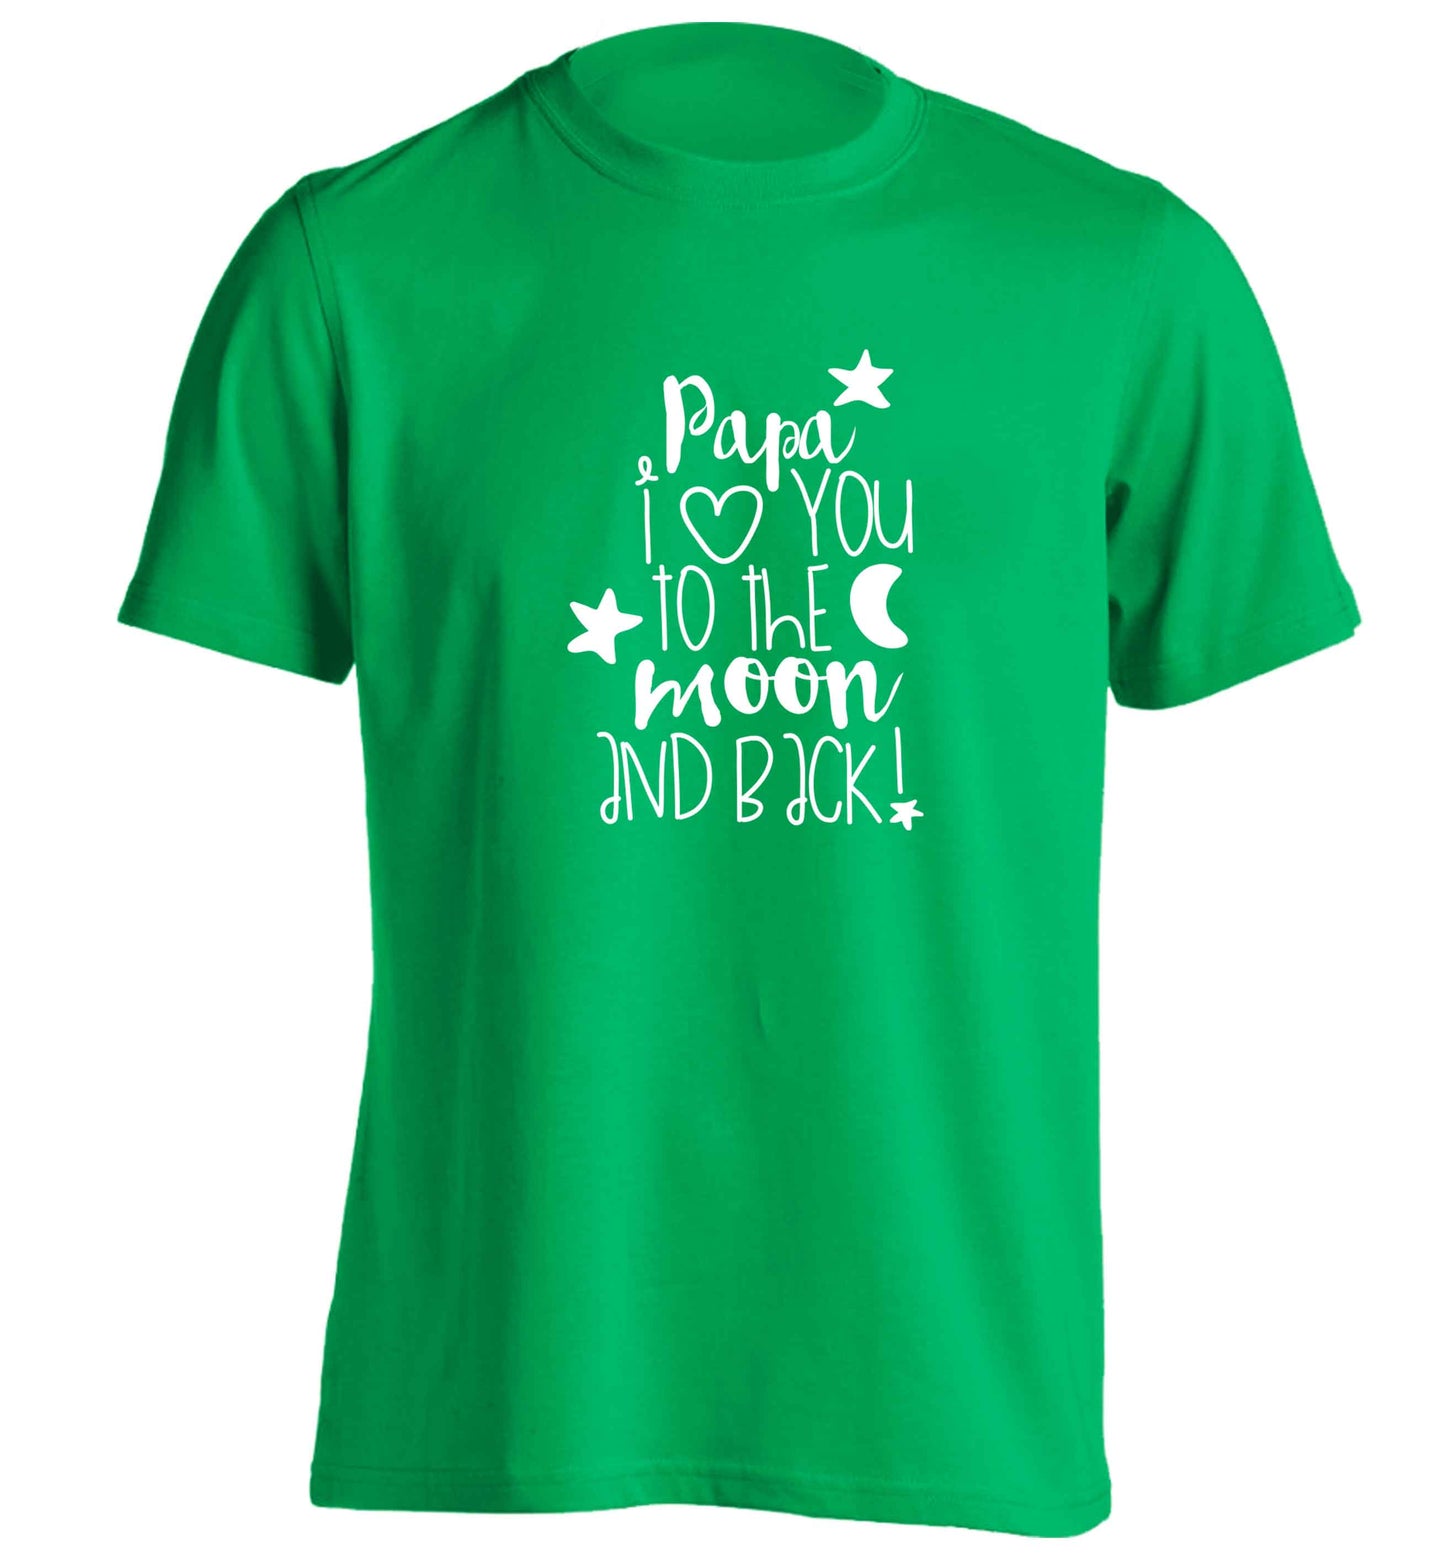 Papa I love you to the moon and back adults unisex green Tshirt 2XL